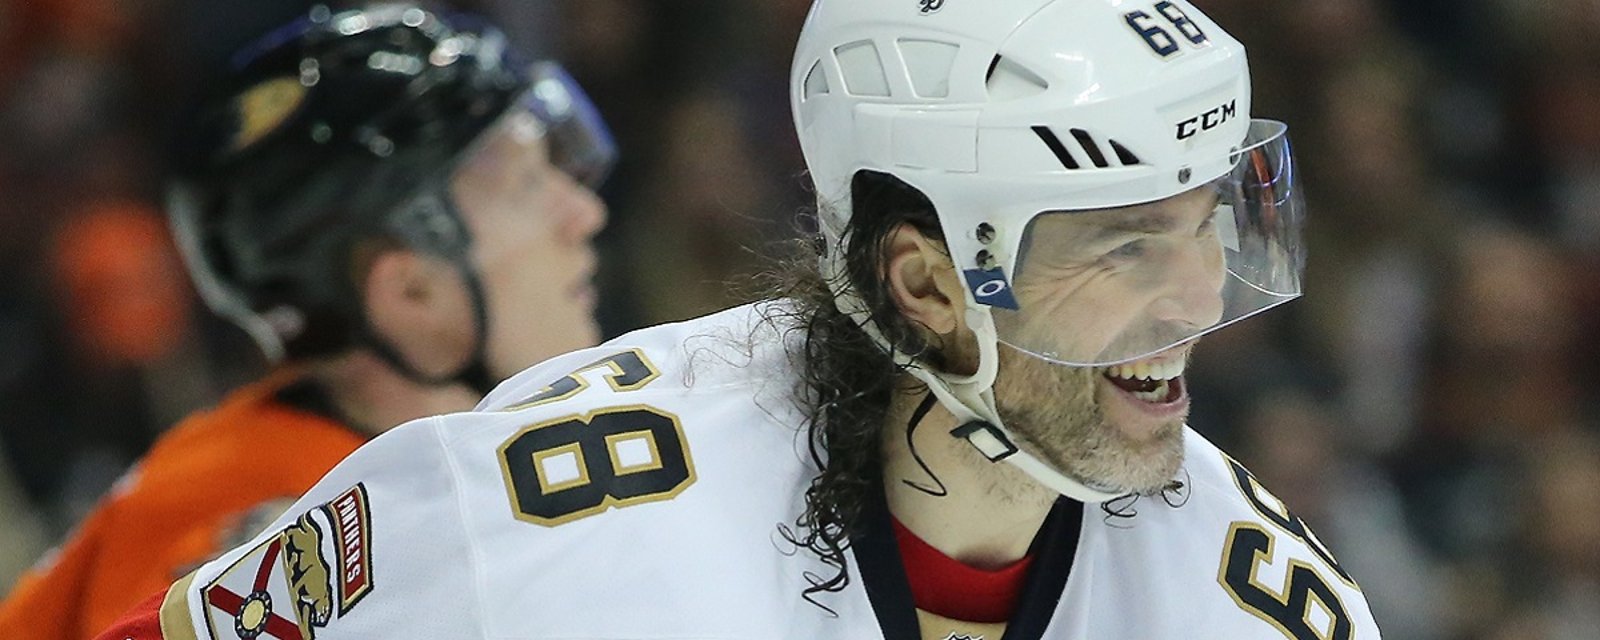 Jagr sends a warning to NHL fans tuning in to watch him tonight.